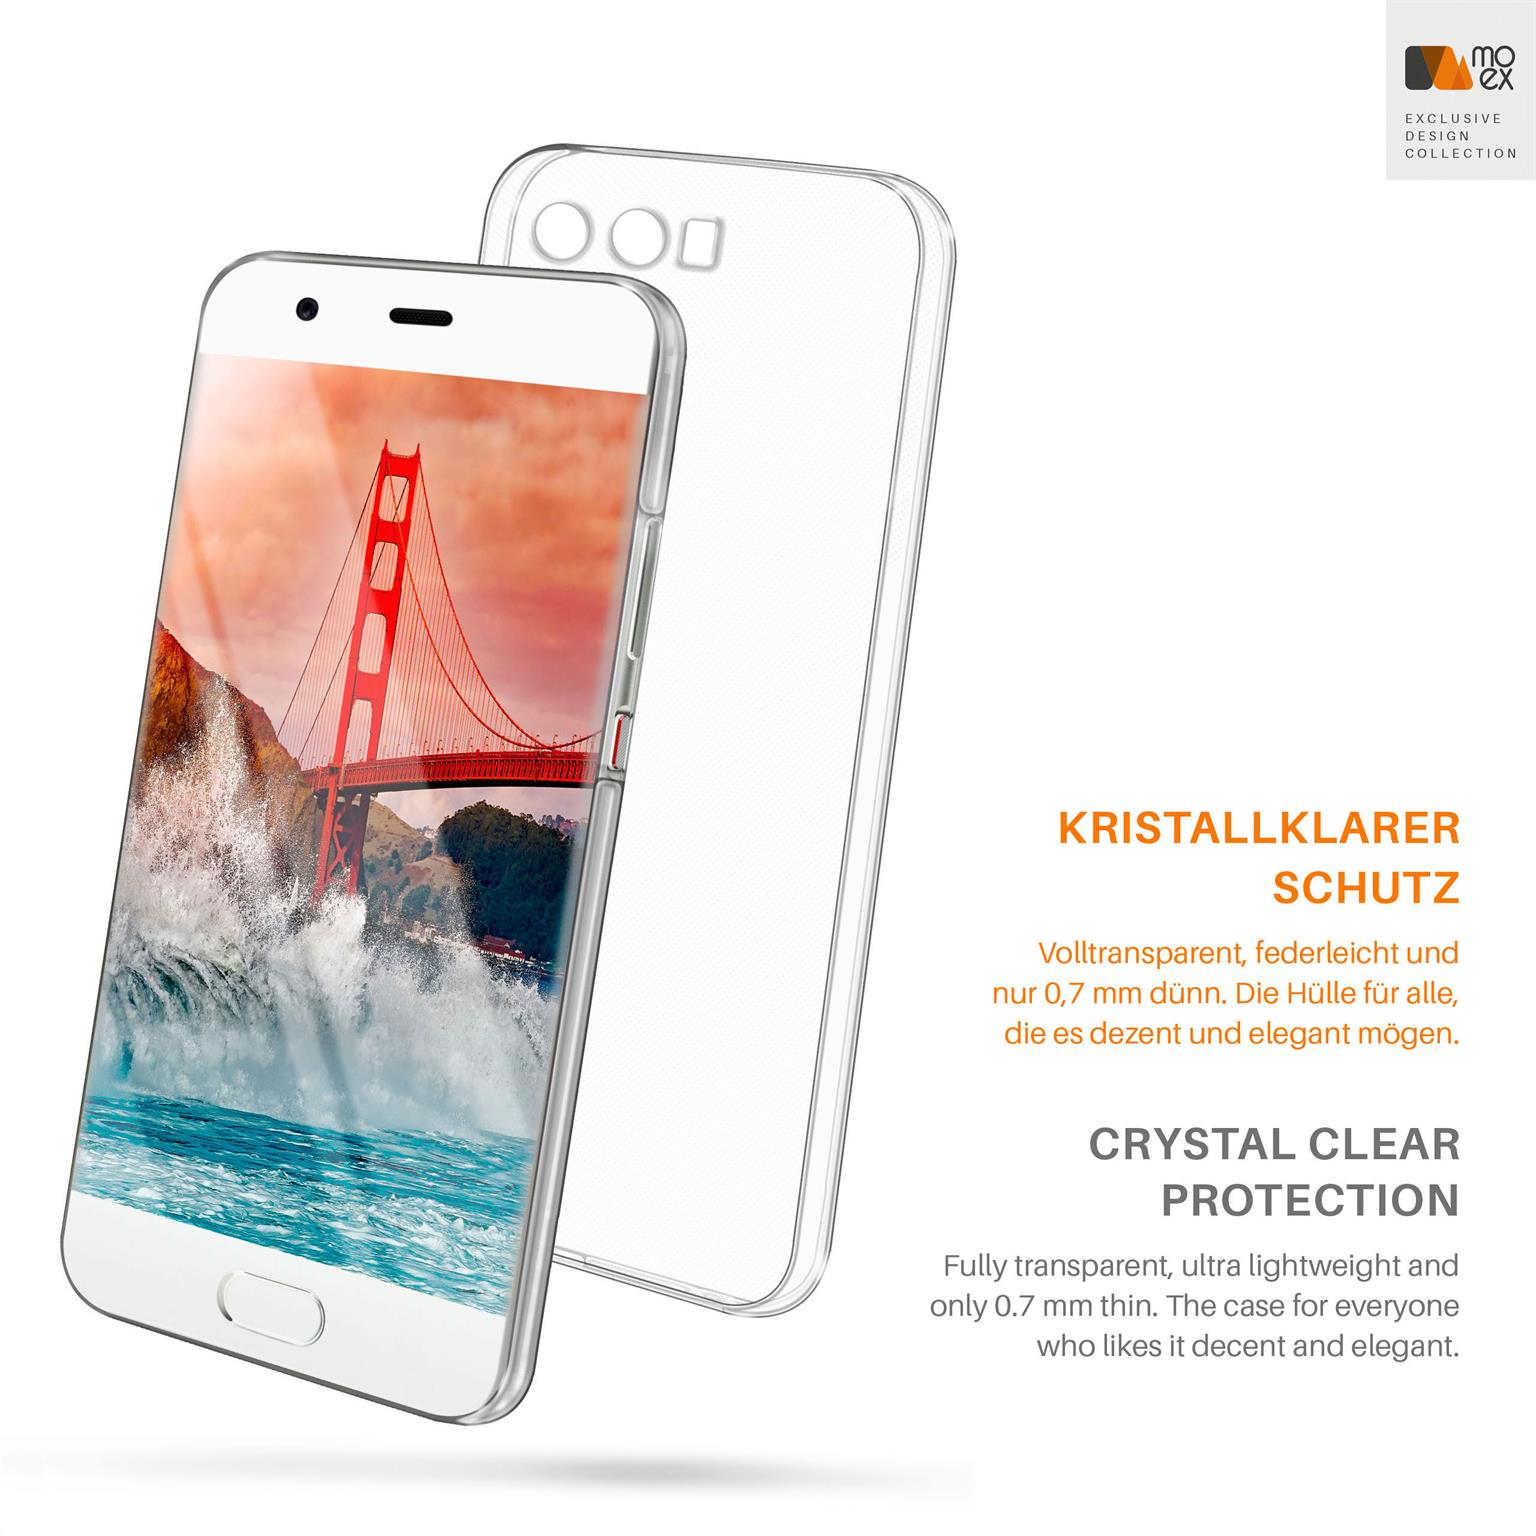 Aero Crystal-Clear Backcover, MOEX P10, Case, Huawei,